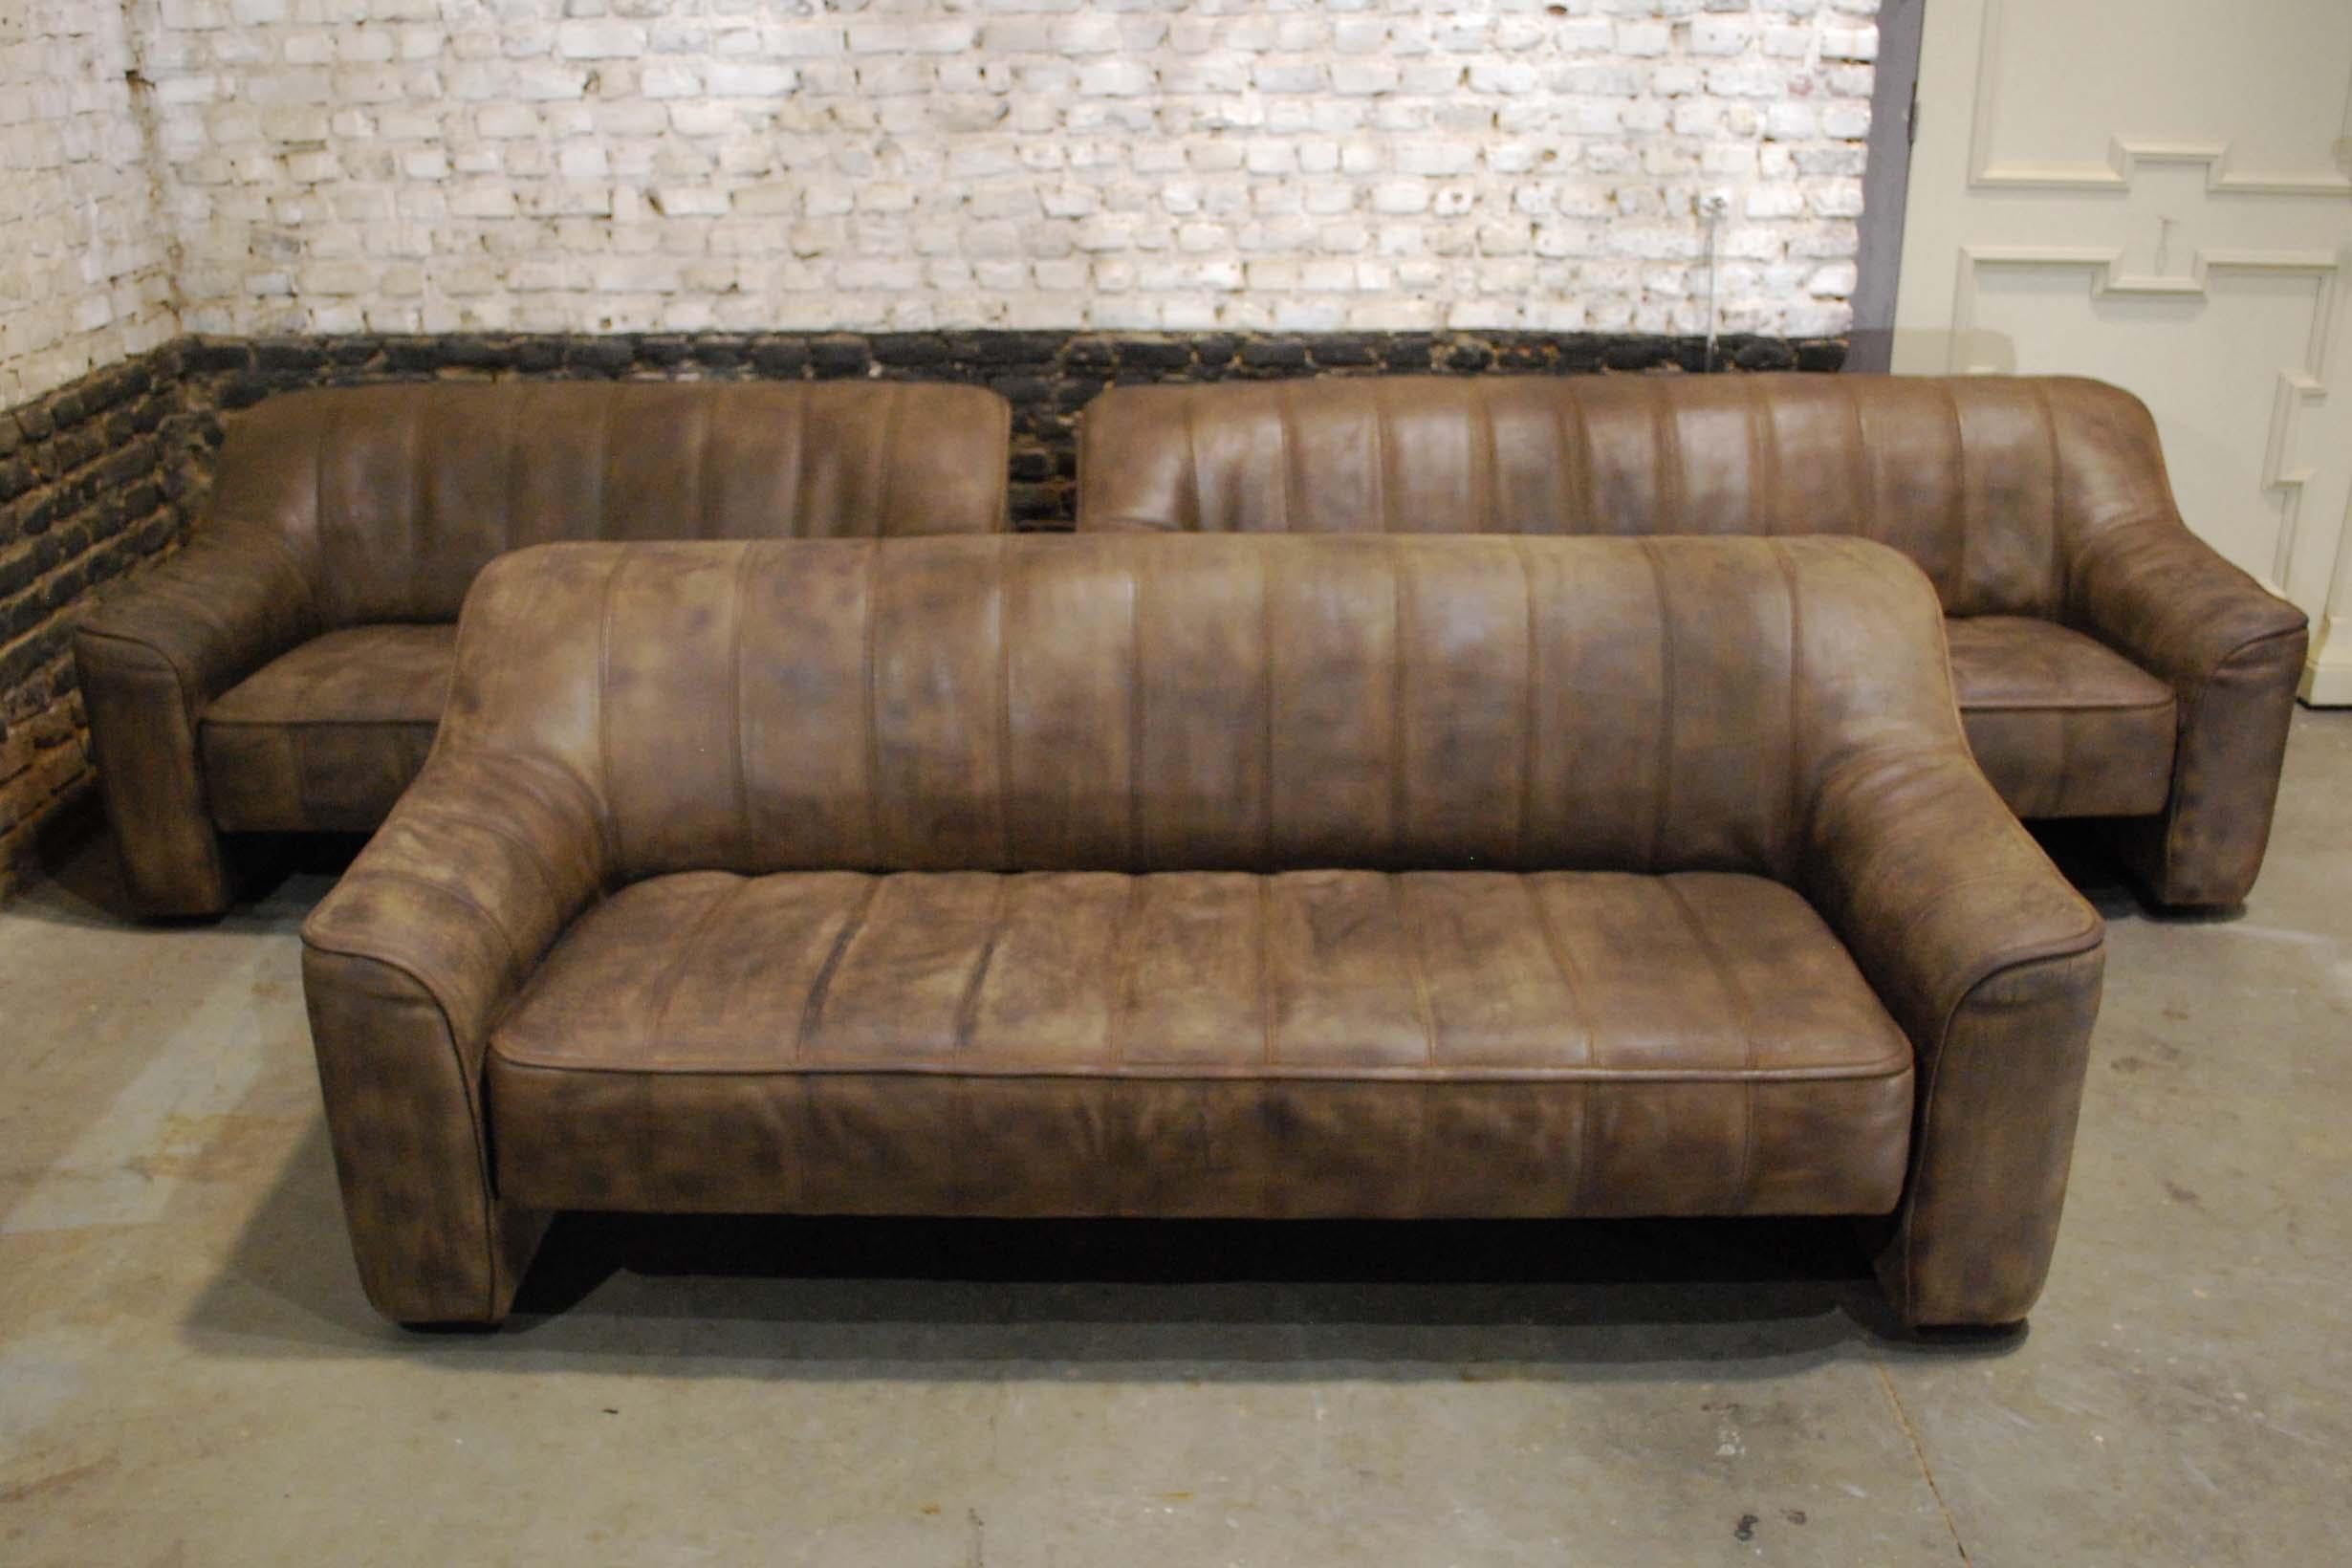 A beautiful Leather block style sofa set in walnut color with beautiful patina and vertical stitching, produced by De Sede, model 44. The softened edges and aged leather reference the organic and naturalist trend was seen in midcentury design. The